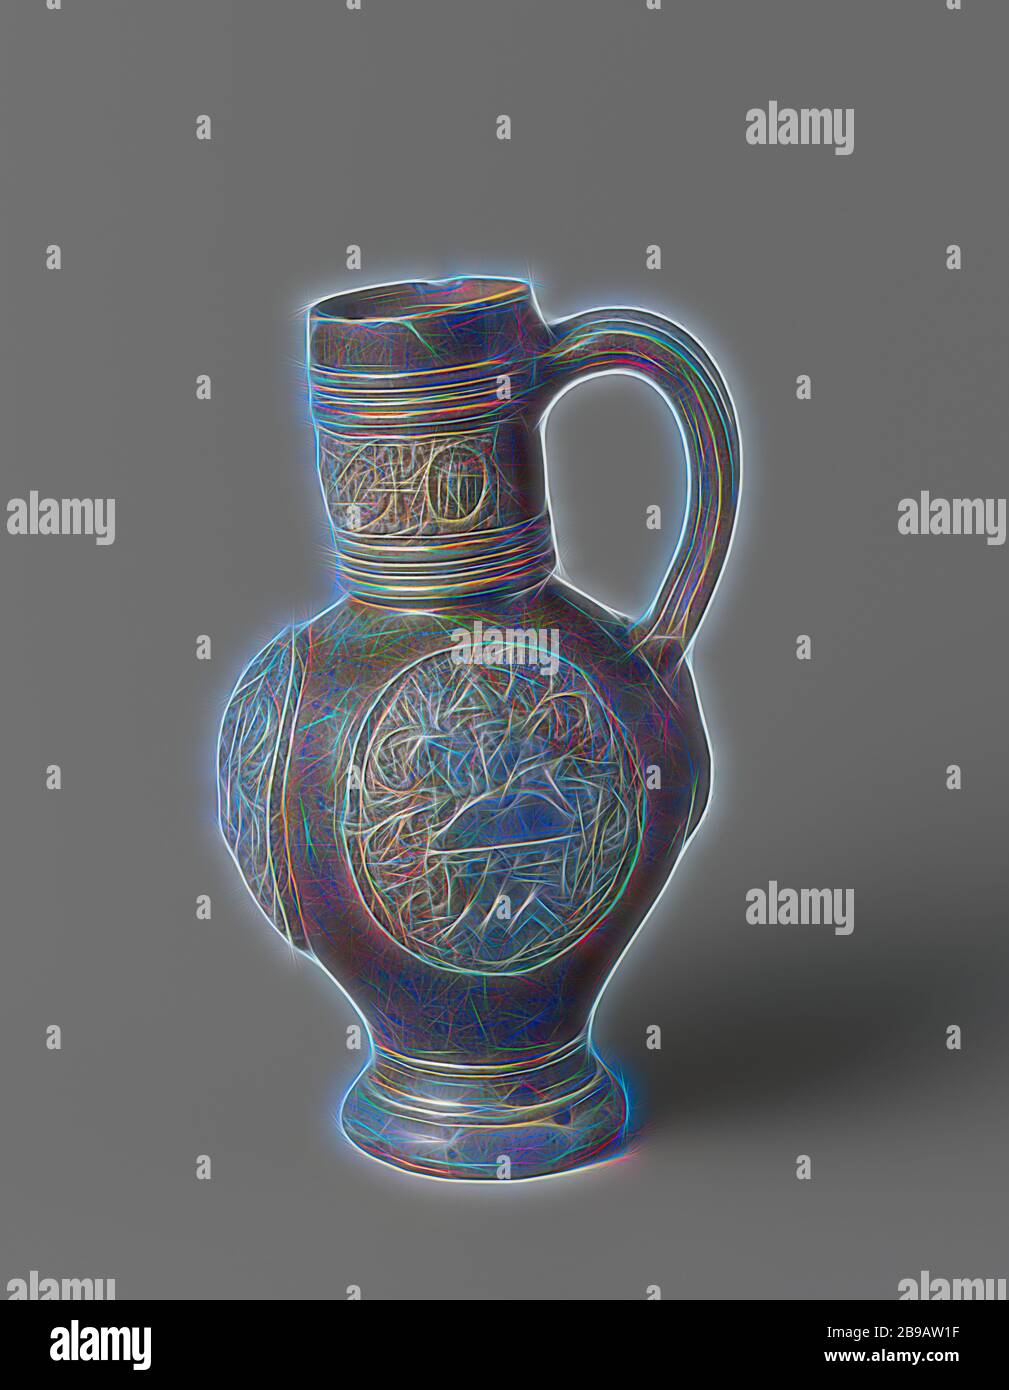 Jug with a coat of arms, medallions and foliate scrolls, Stoneware jug on high feet with an egg-shaped body and wide, long neck. The C-shaped ear is attached to the neck and shoulder. Profiles on the neck and foot. Covered with a brown engobe. On the belly three times in relief a printed and imposed medallion with a weapon in it. The weapon consists of a zigzag band with inverted tilt. The shield is surrounded by leaf vines and a helmet with an arrow in hand is used as a helmet sign. On the top the inscription 'WINANT VON KREPS / 84'. On the neck an imposed band with portraits or masks in meda Stock Photo